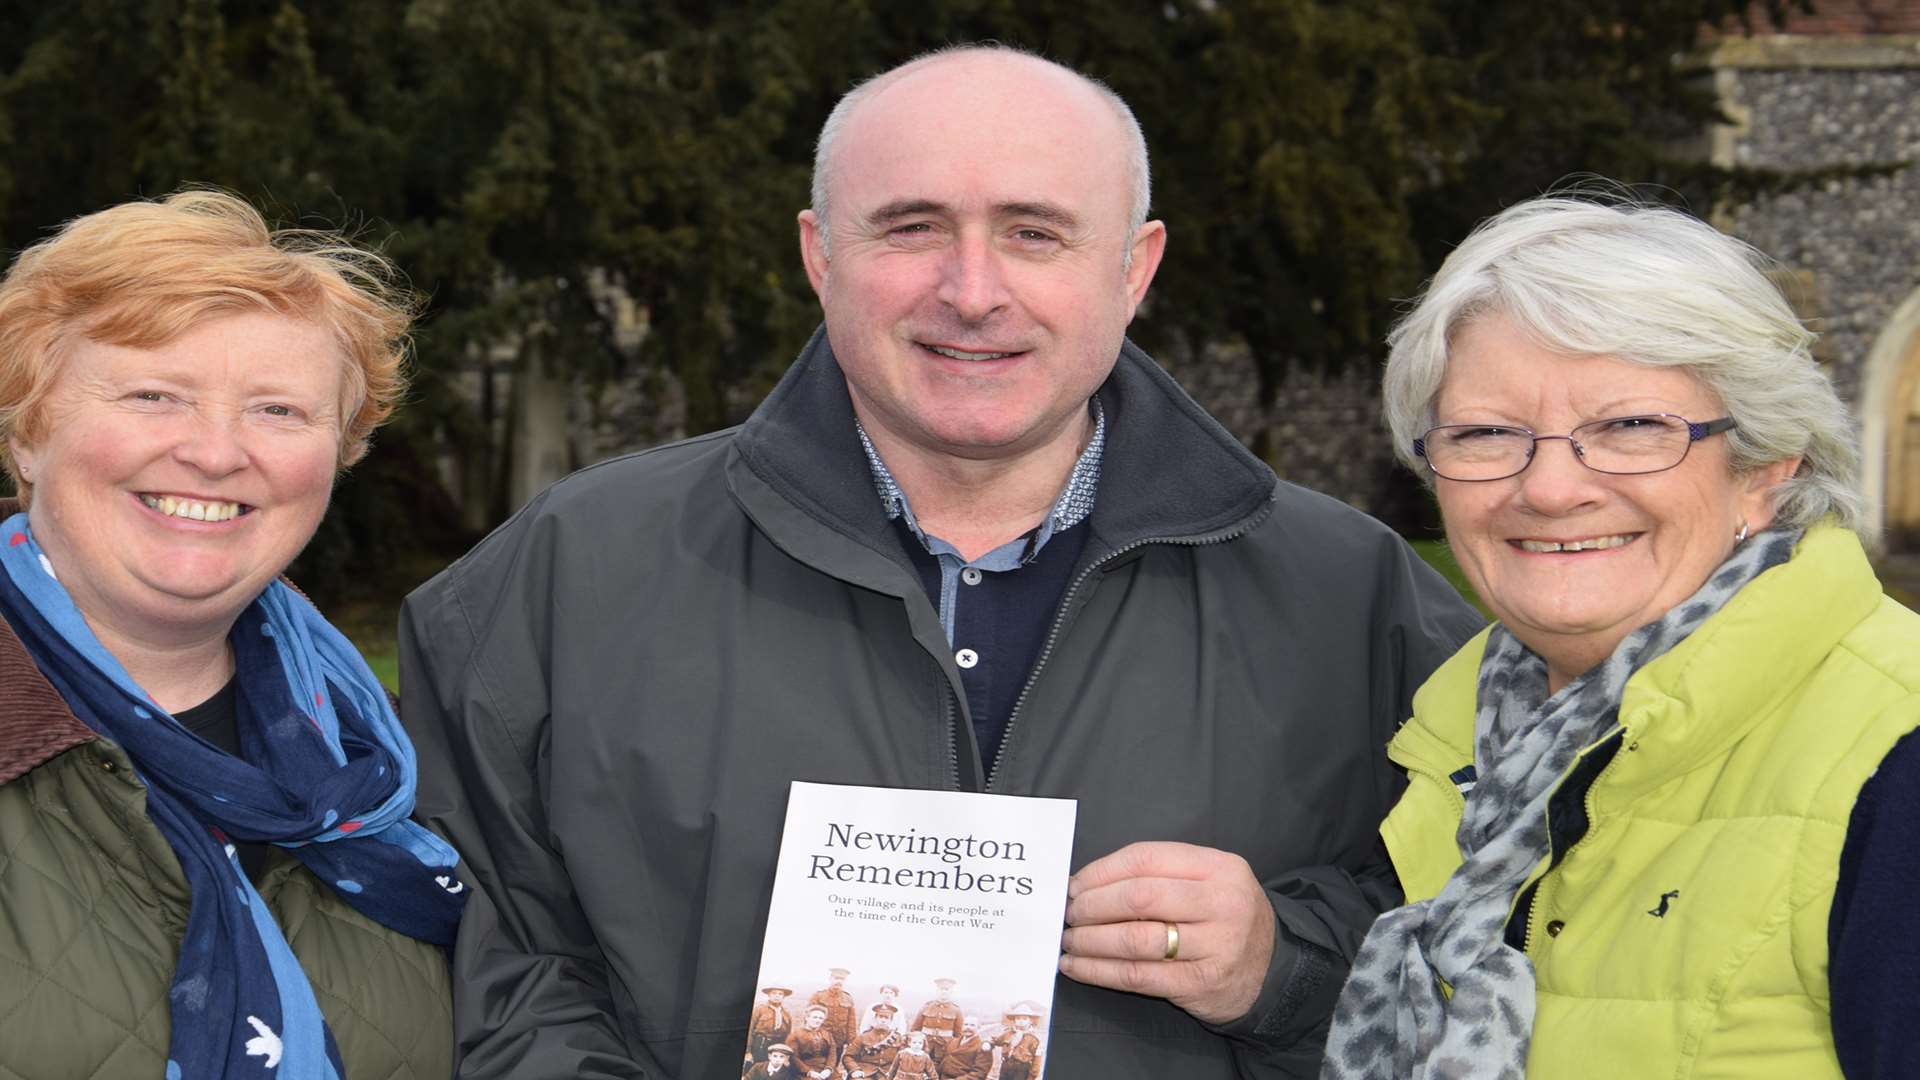 Authors Debbie Haigh, Dean Coles and Thelma Dudley with their book Newington Remembers